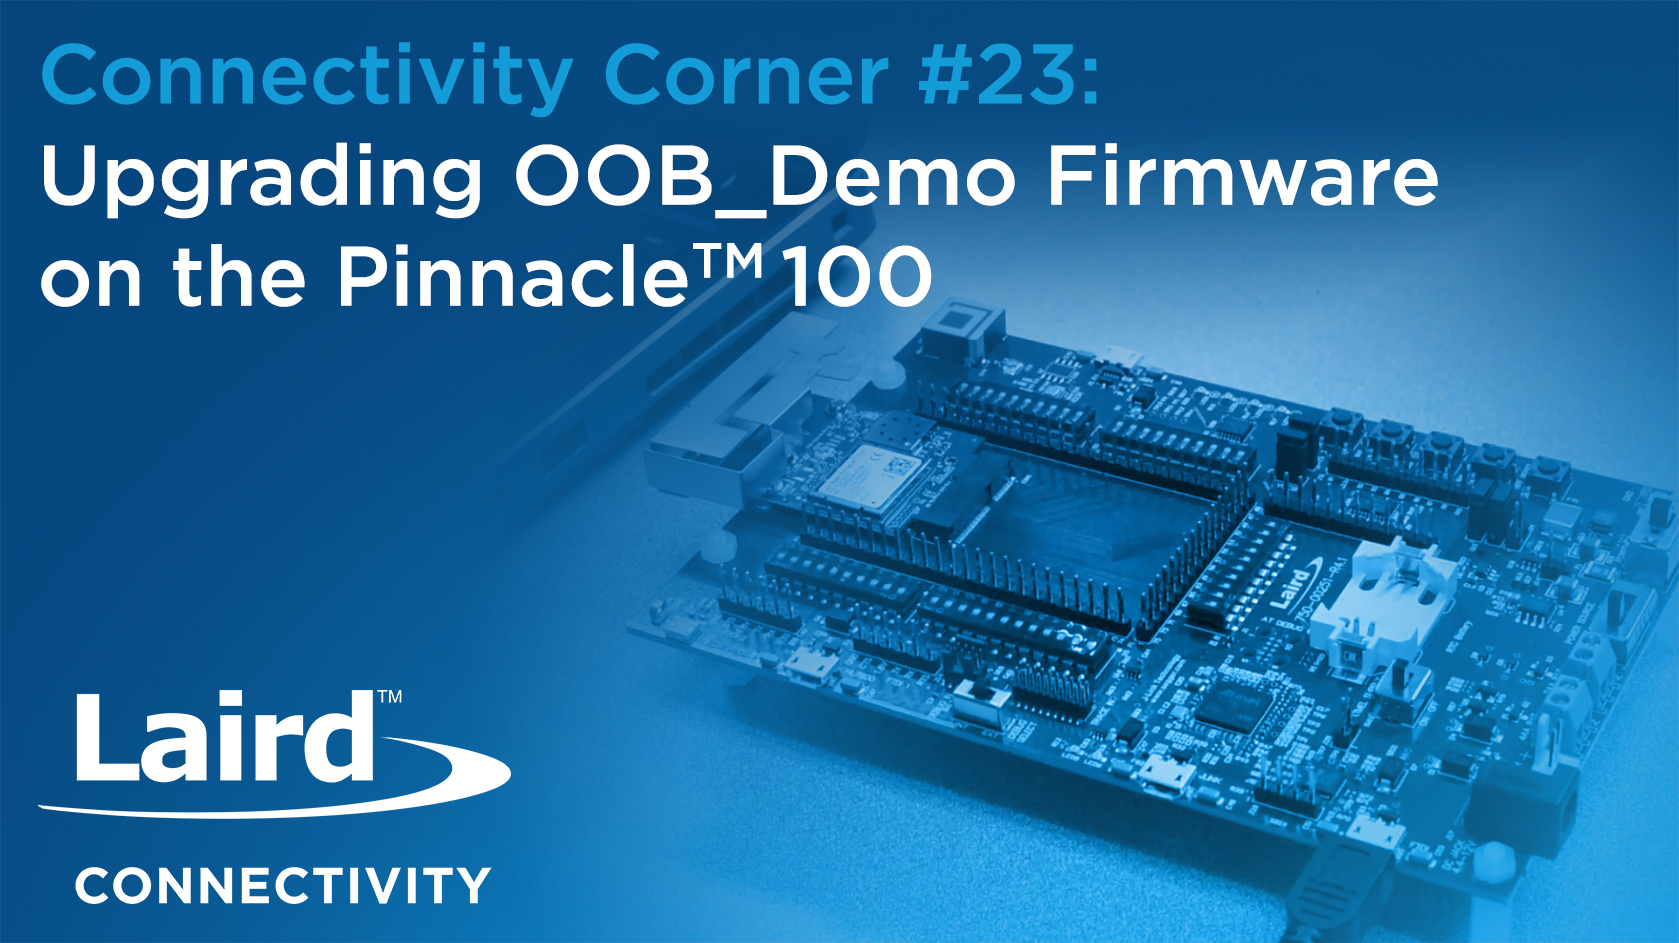 Episode 23: Upgrading OOB Demo Firmware on the Pinnacle 100